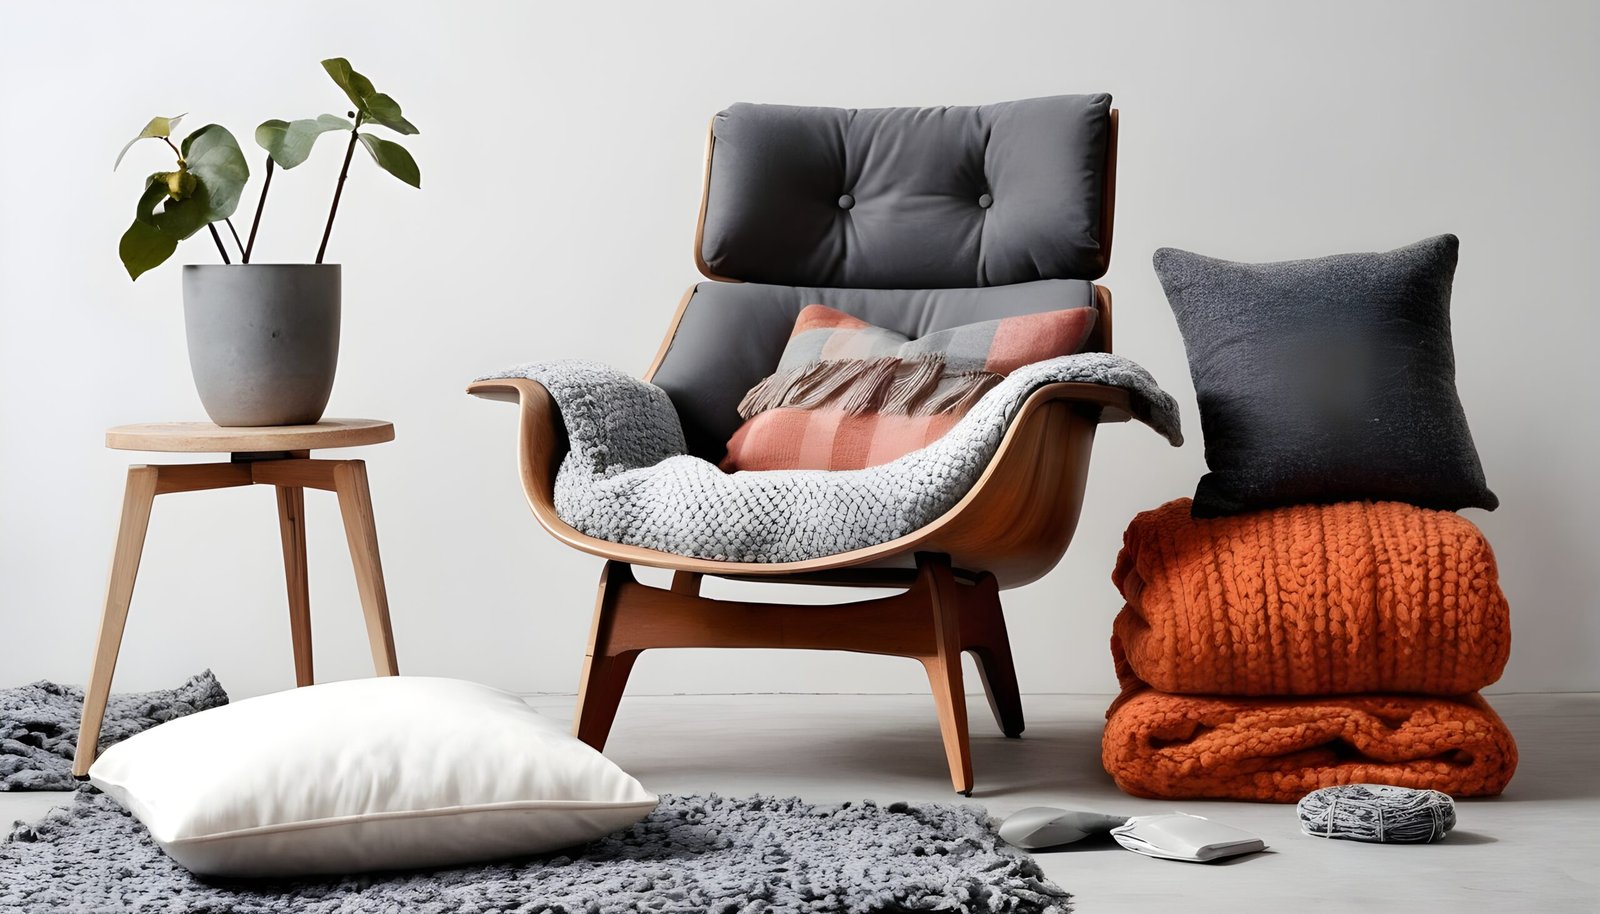 Scandinavian eames chair with lots of pillows and blankets.